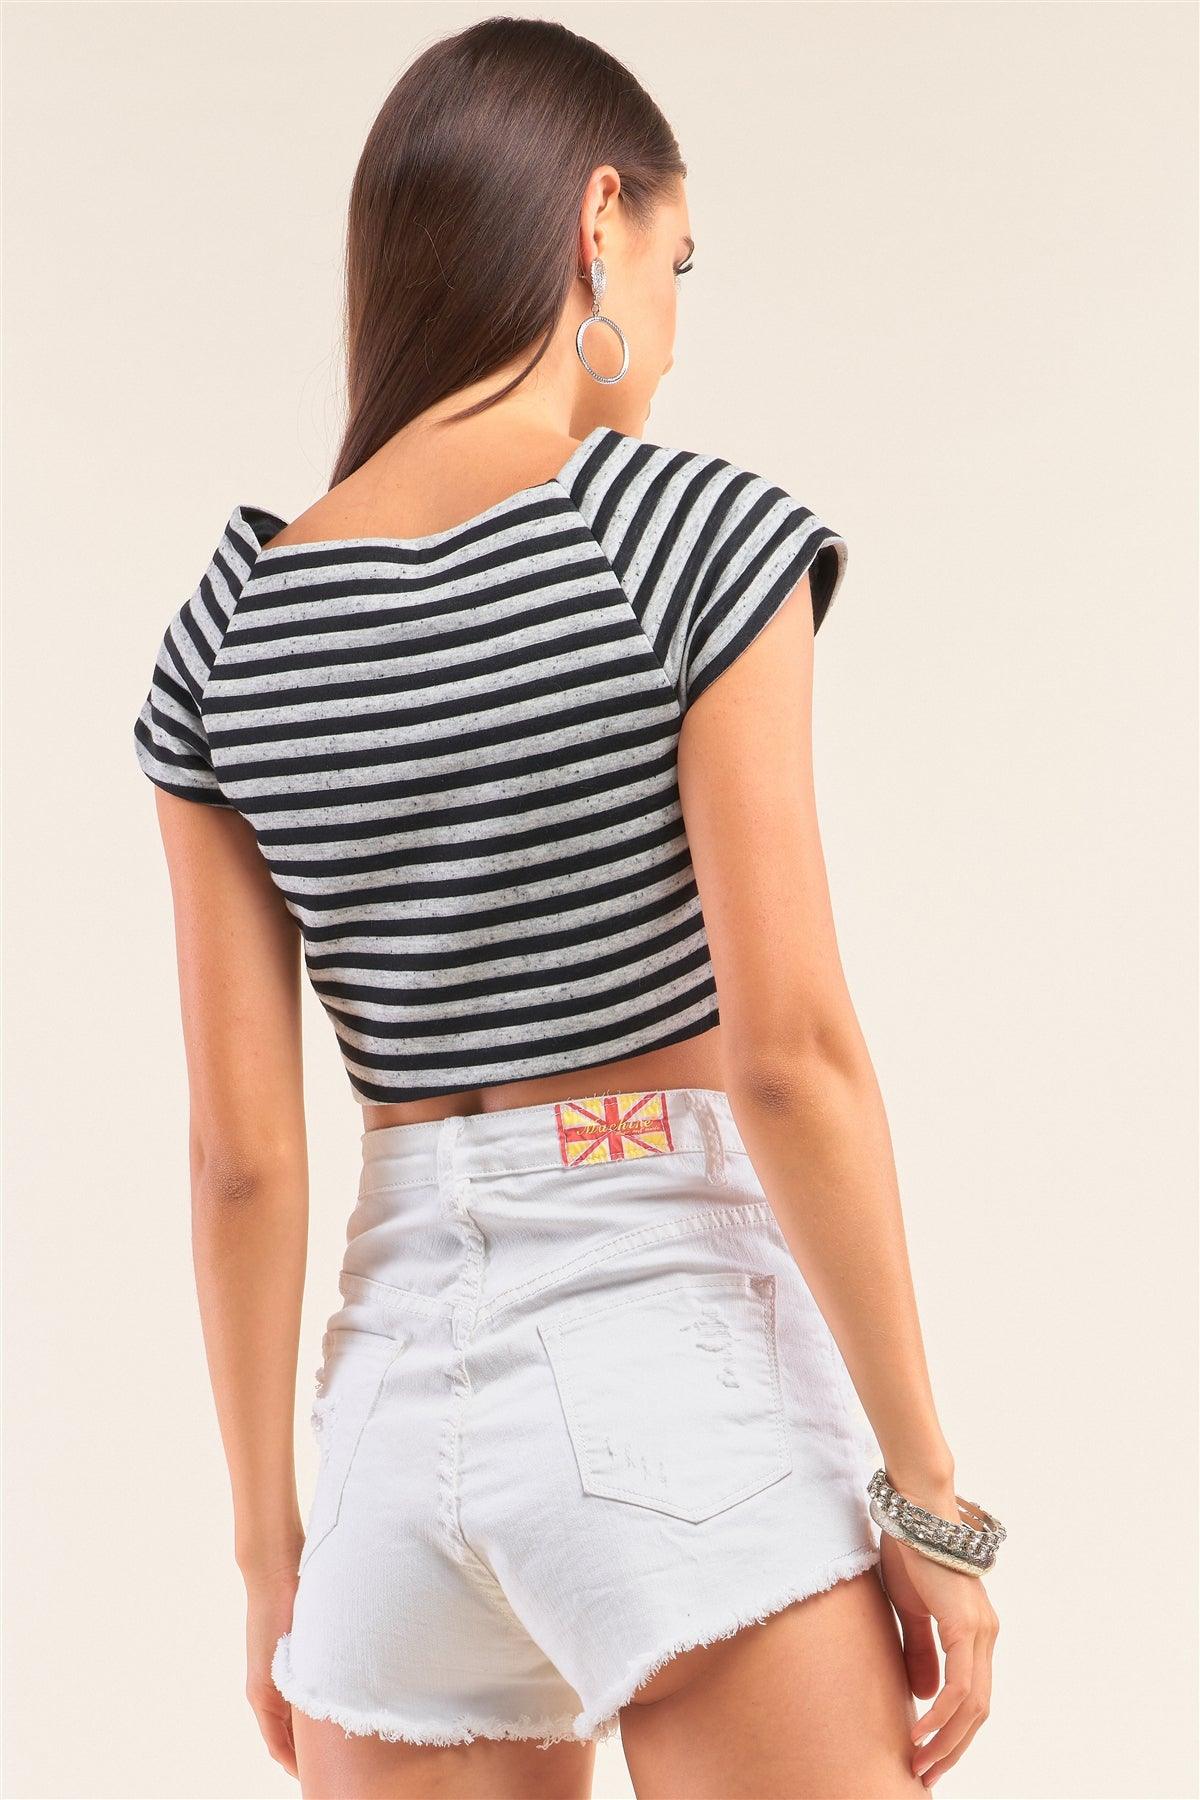 Black And Grey Striped Square Neck Mini Sleeve Cropped Top Naughty Smile Fashion